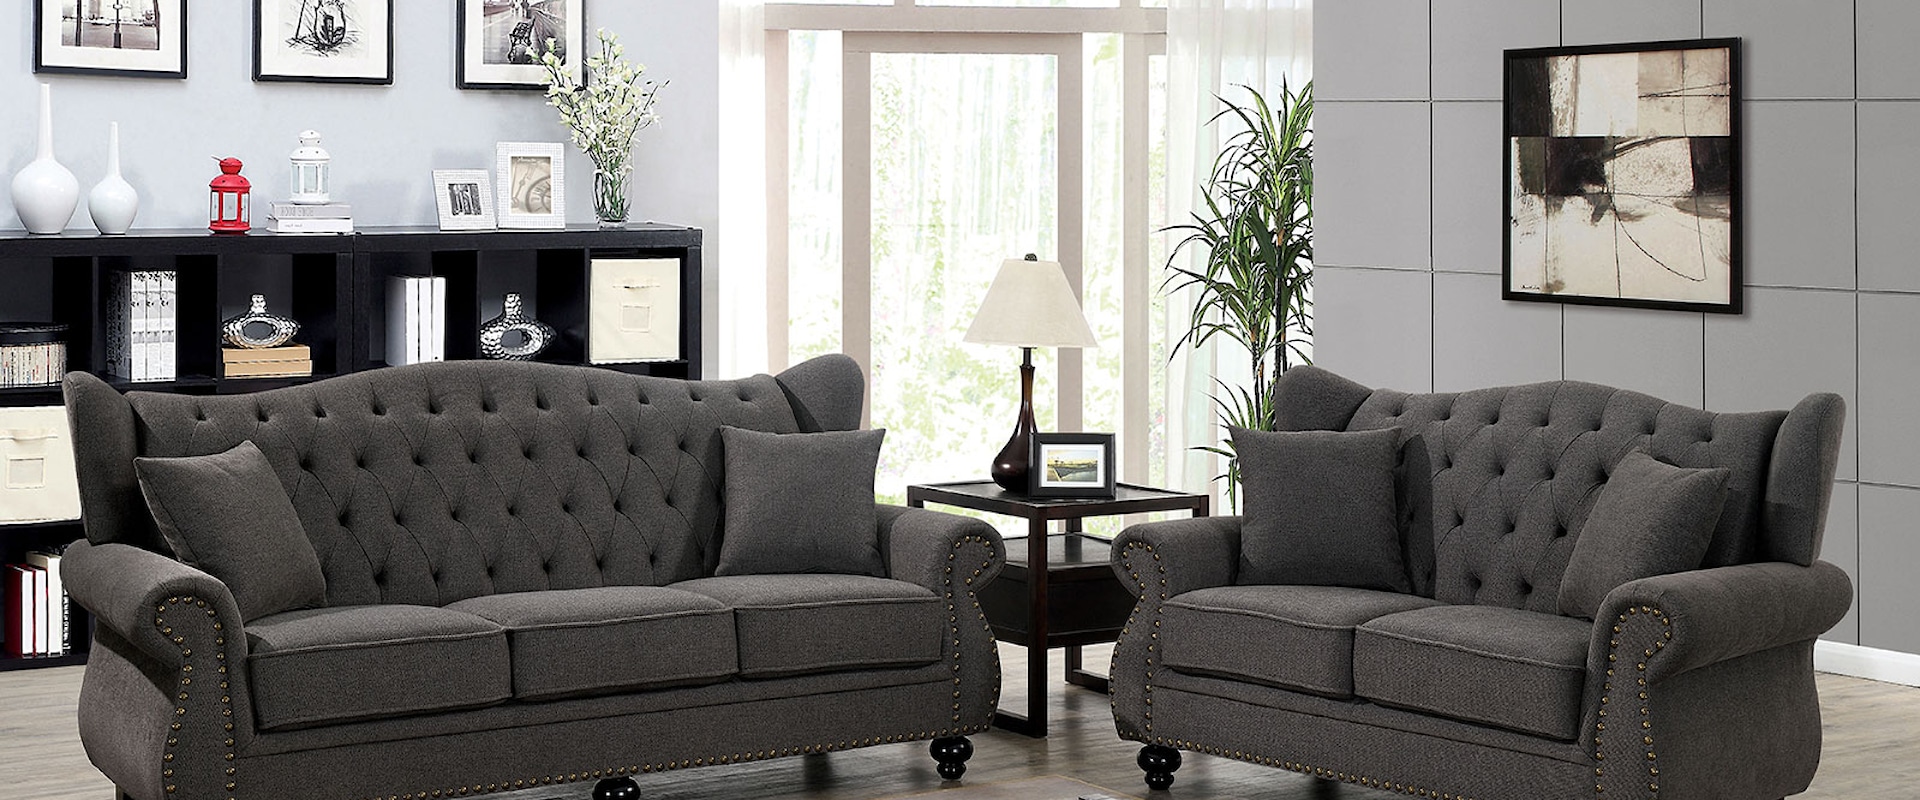 Transitional Sofa and Loveseat Set with Nailhead Trim 